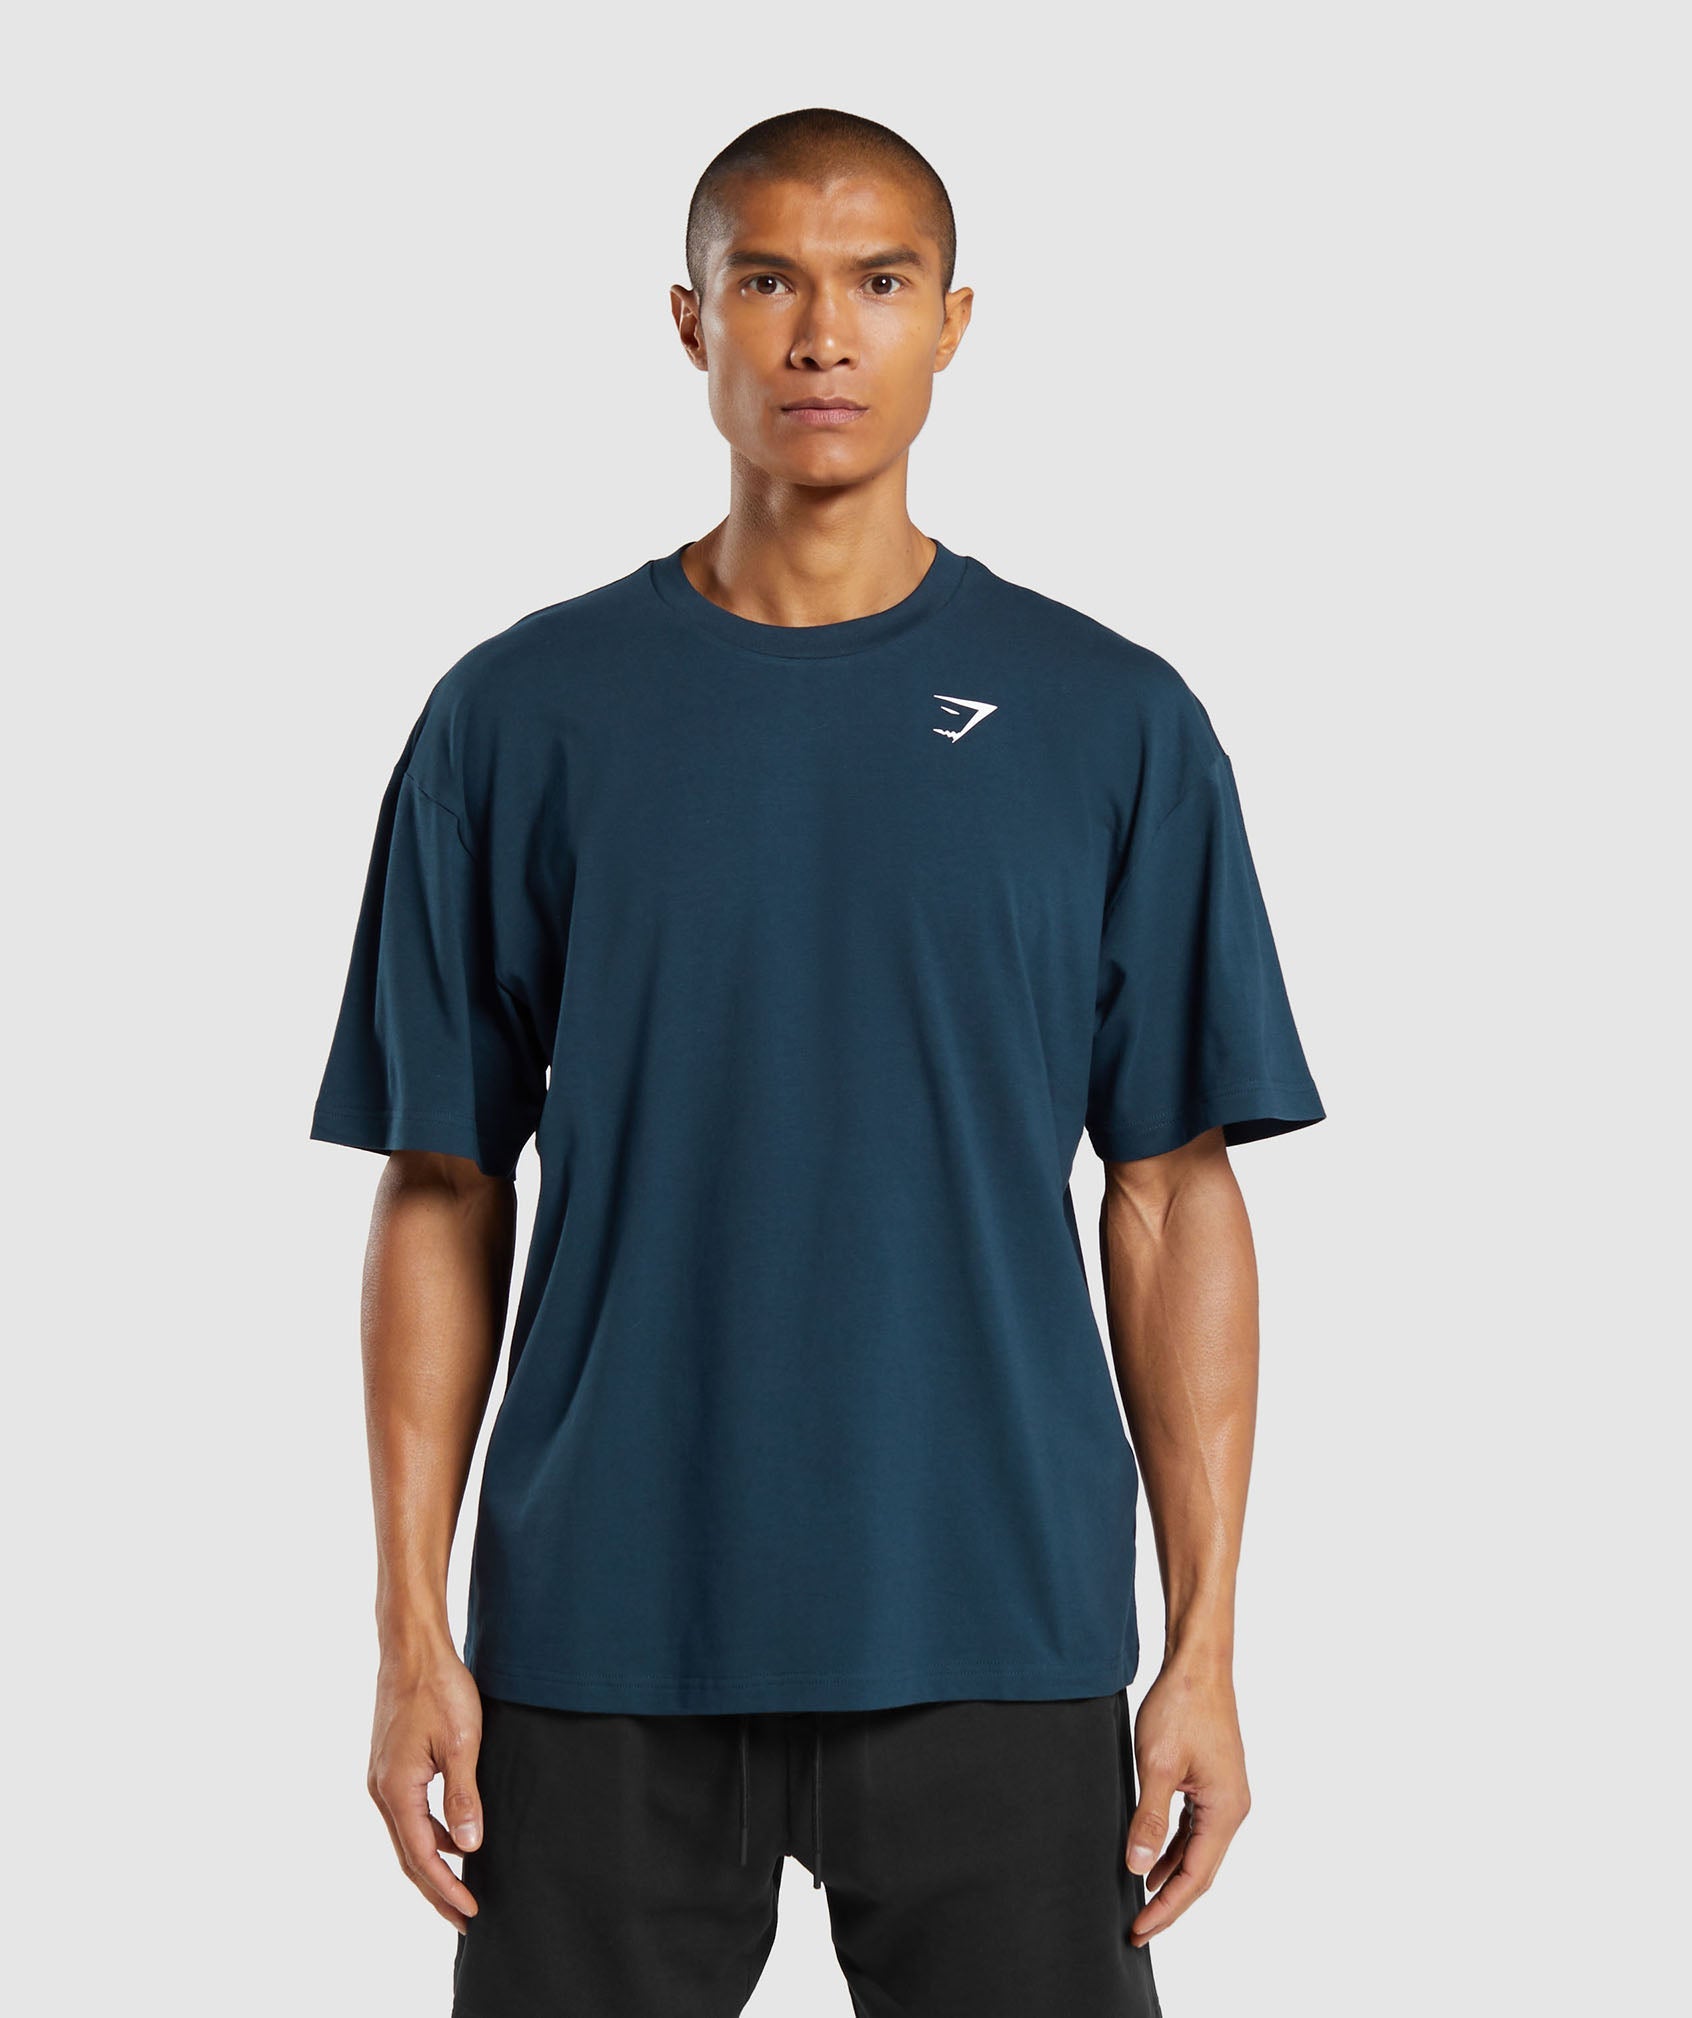 Essential Oversized T-Shirt in Navy is out of stock